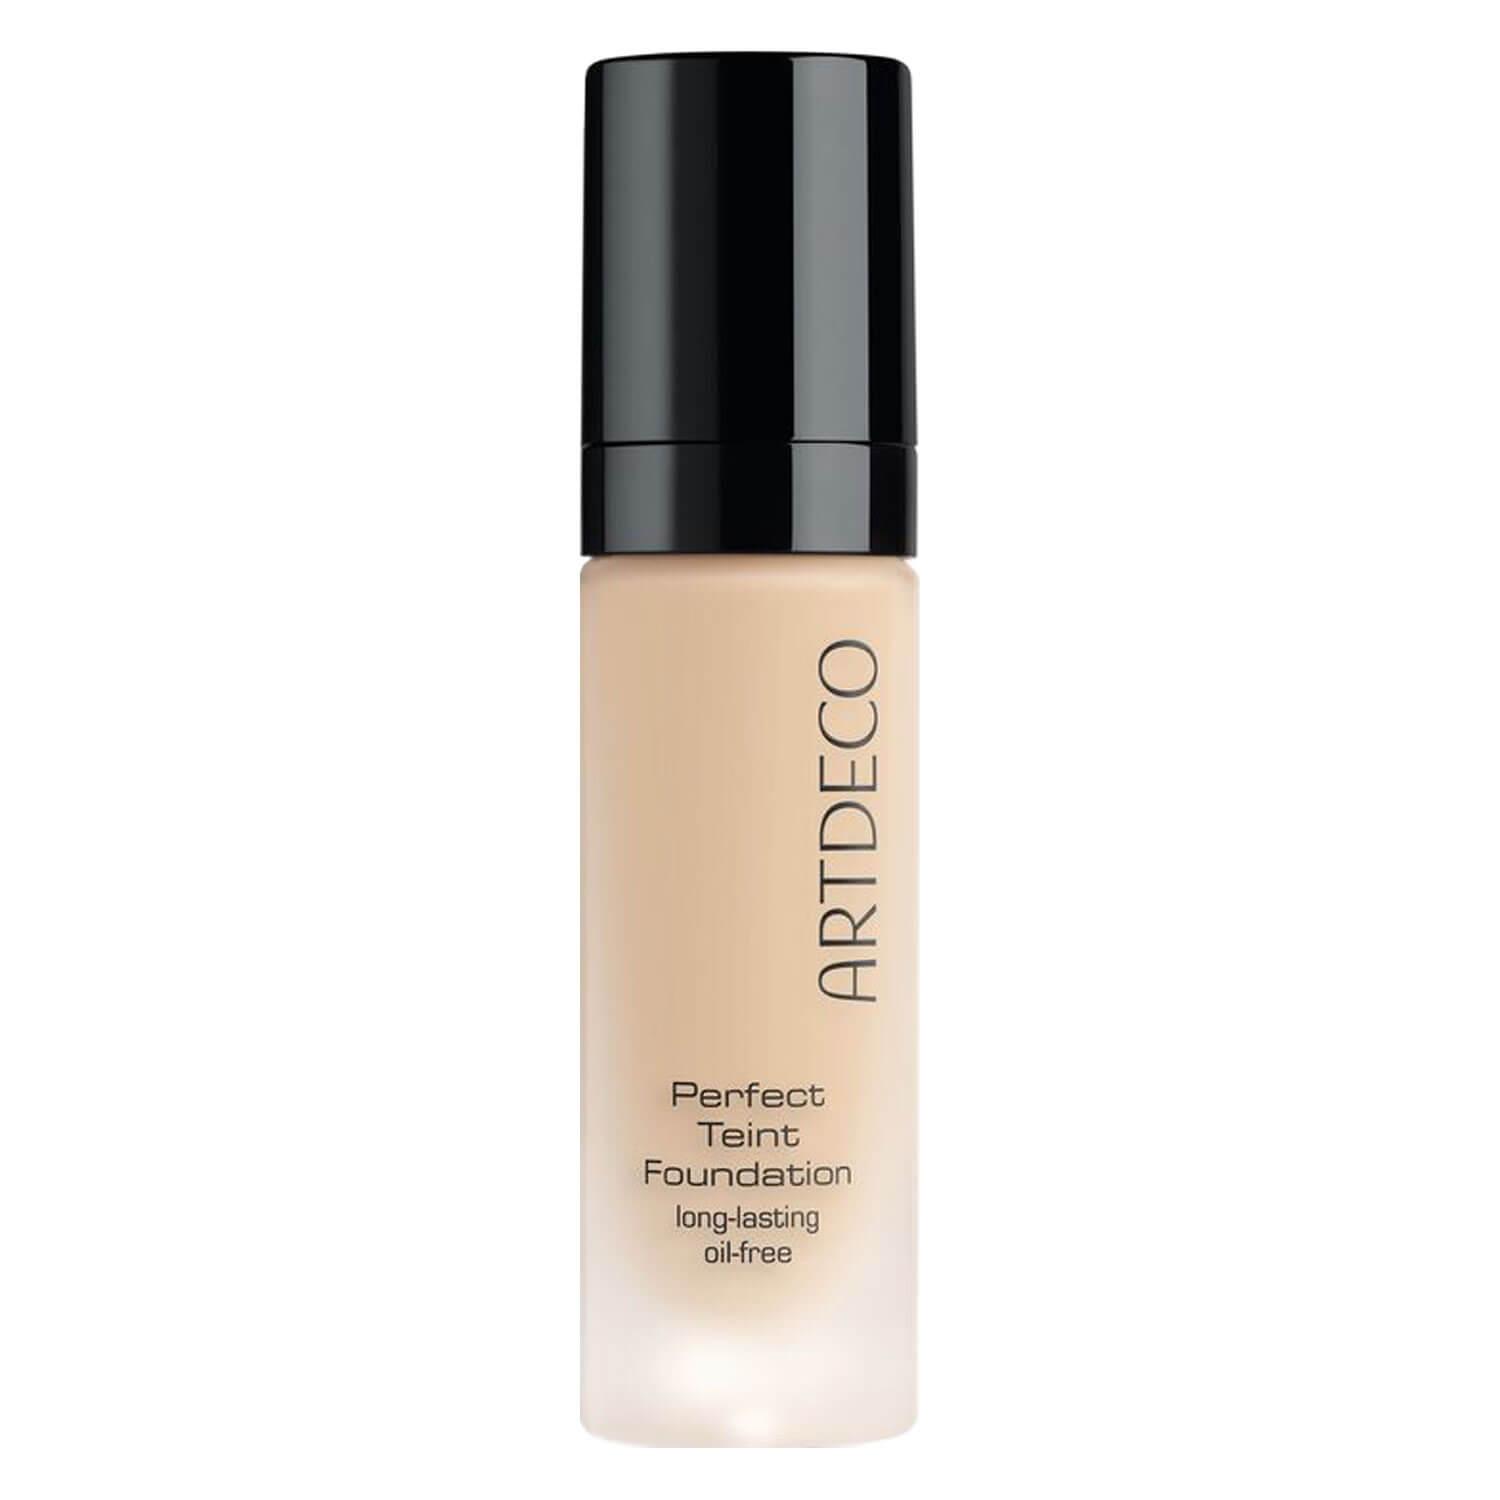 Perfect Teint - Foundation Olive Beige 56